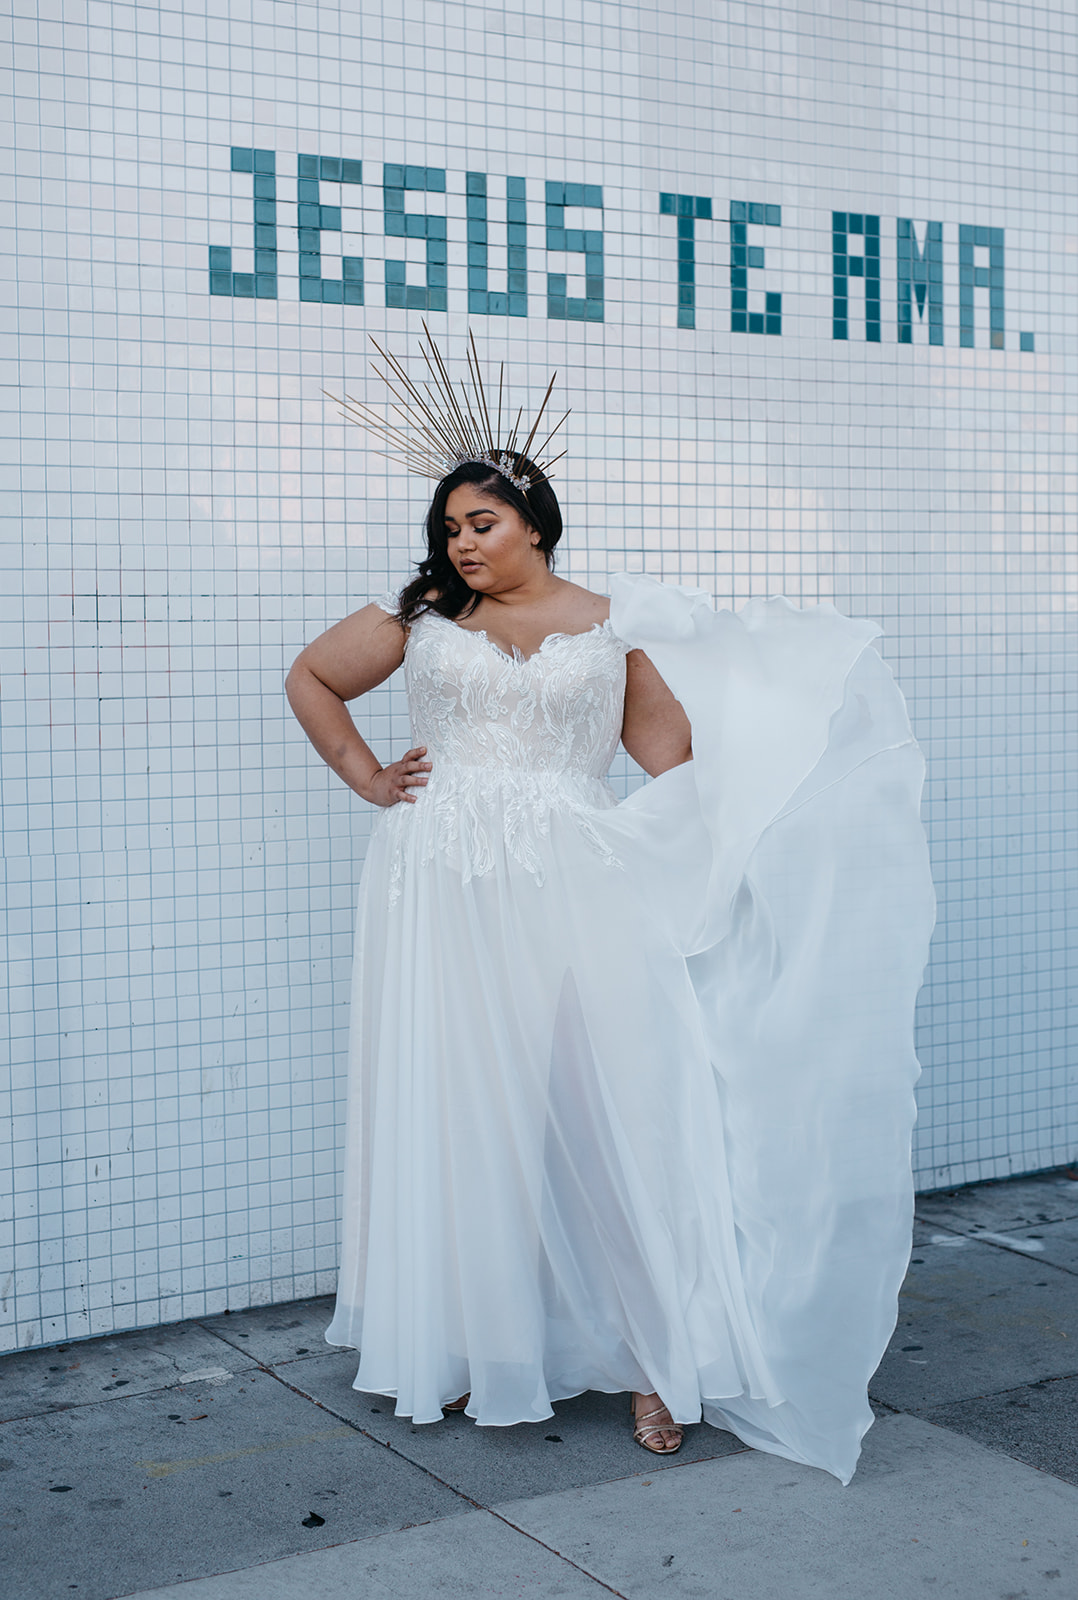 Our Plus Size Wedding Dresses Are Designed for Real Women |